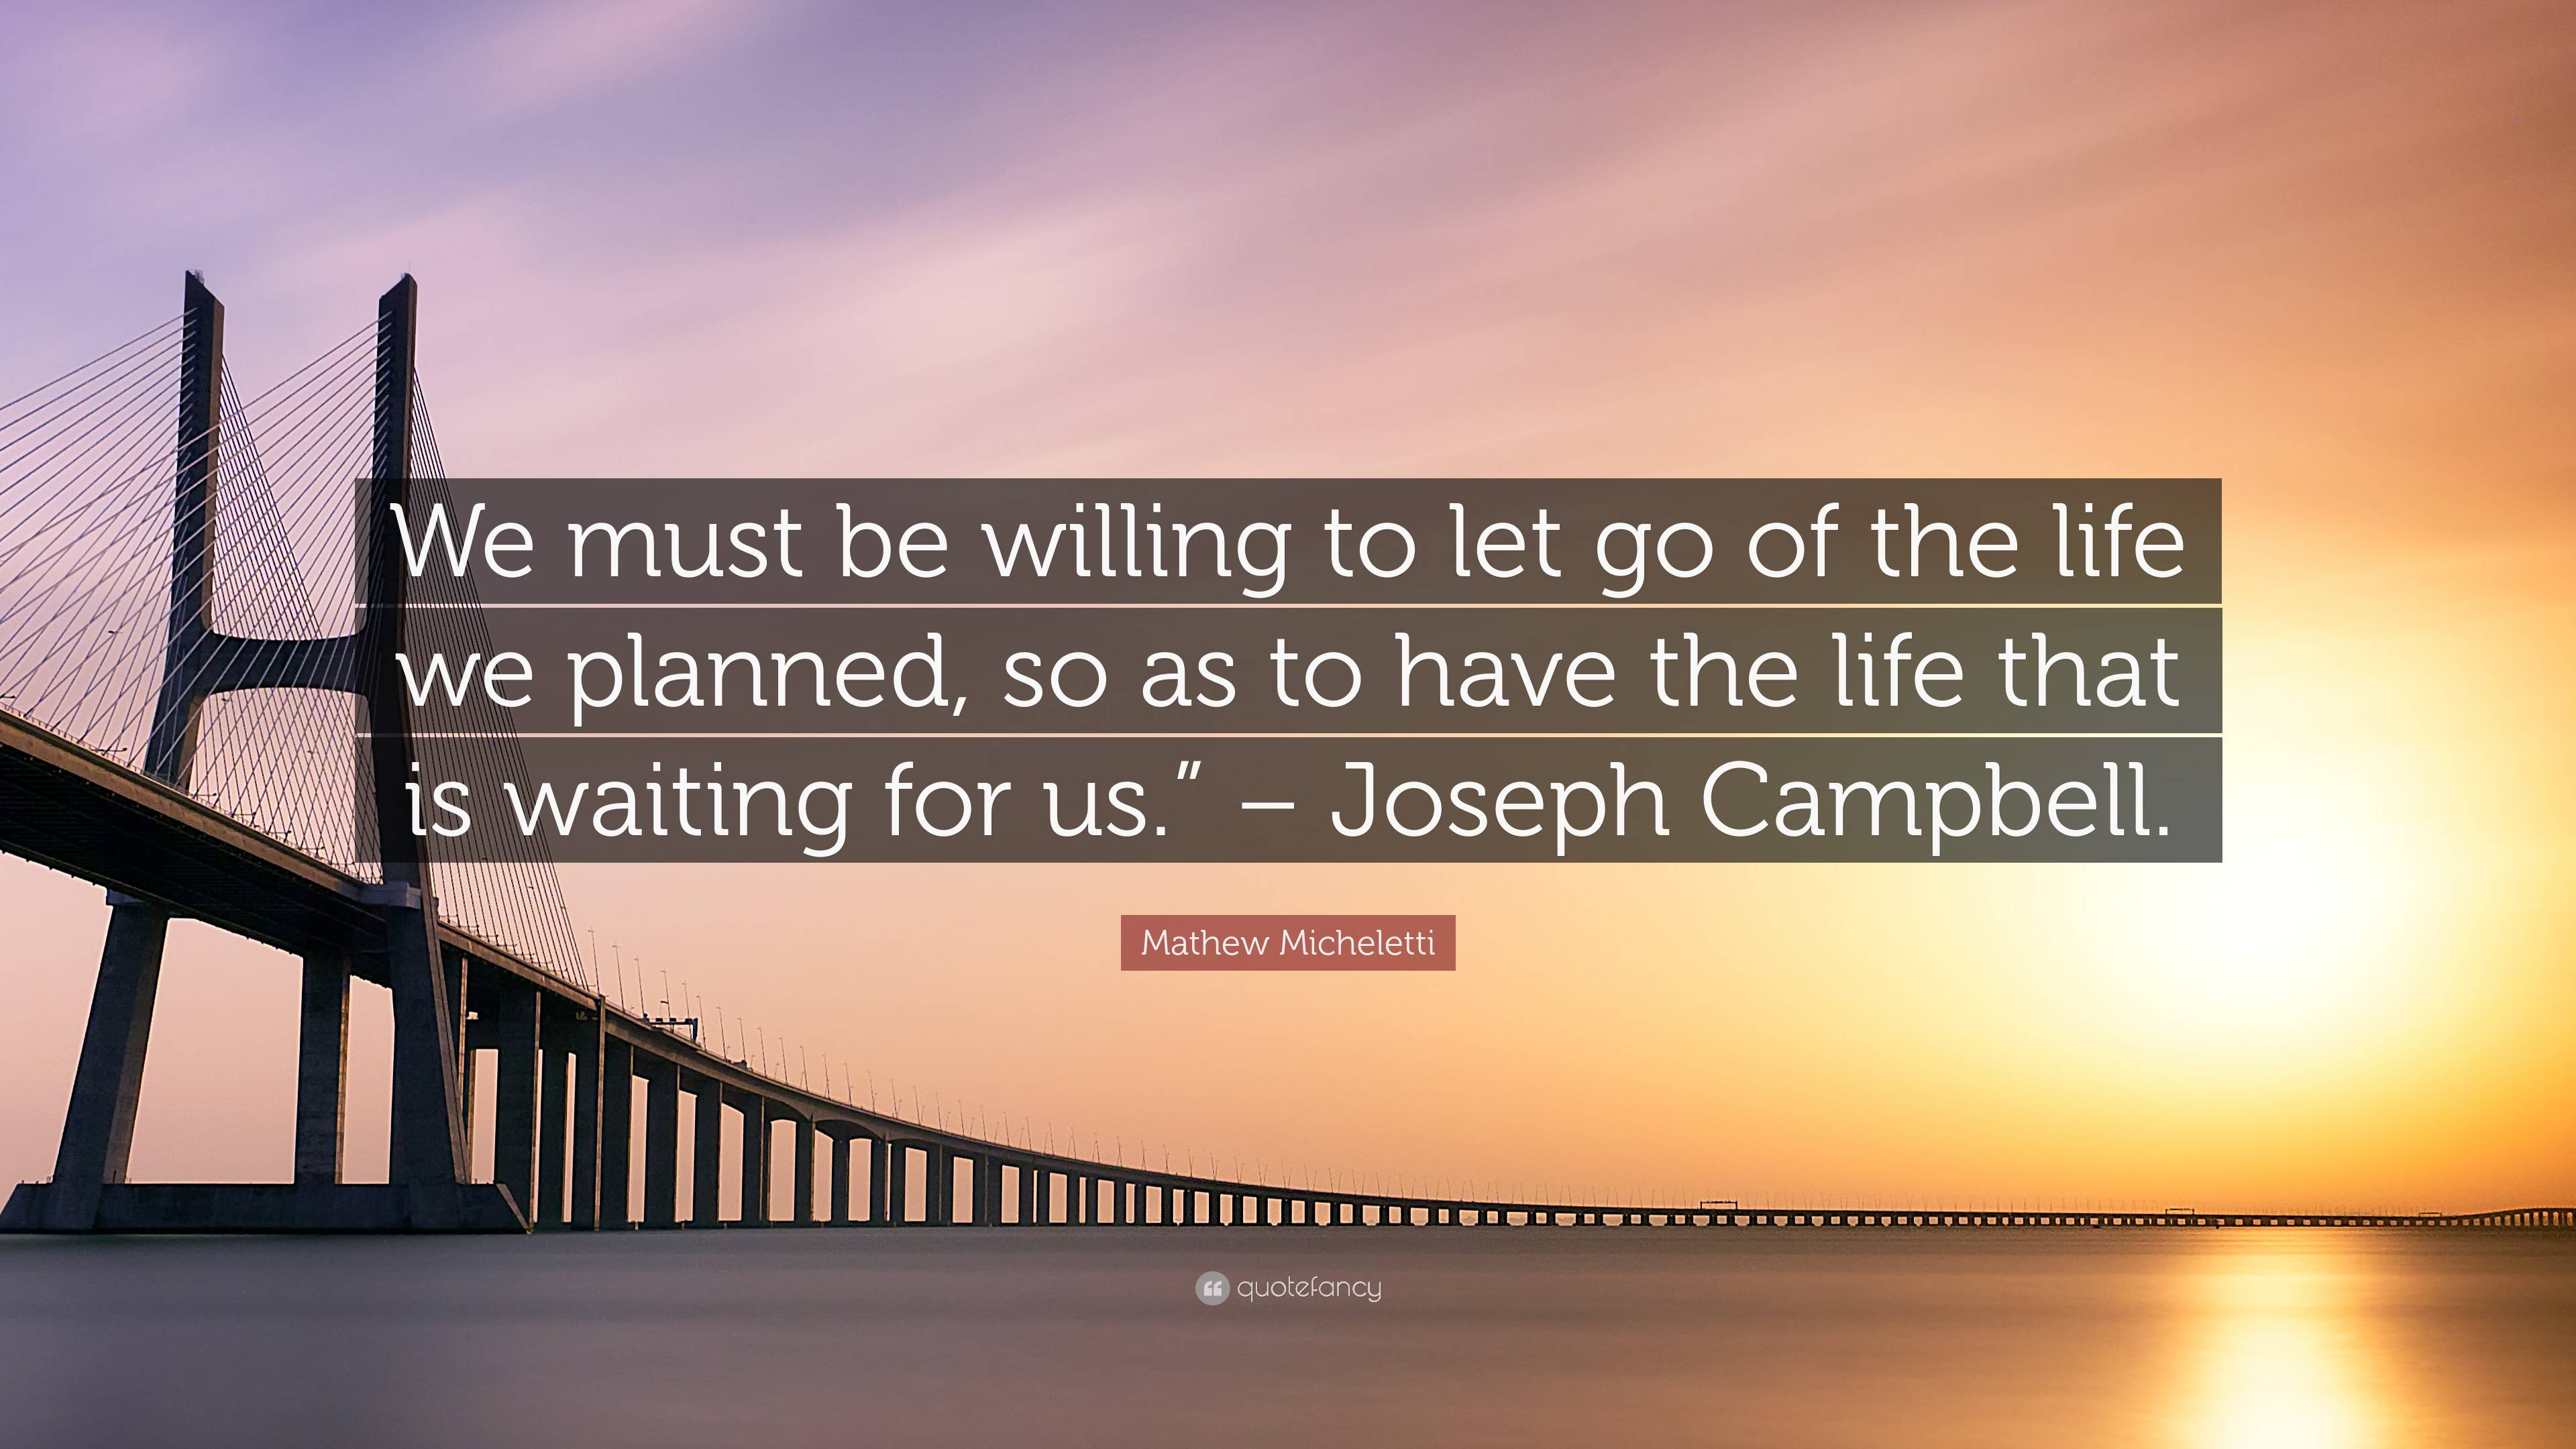 Mathew Micheletti Quote: “We must be willing to let go of the life we ...